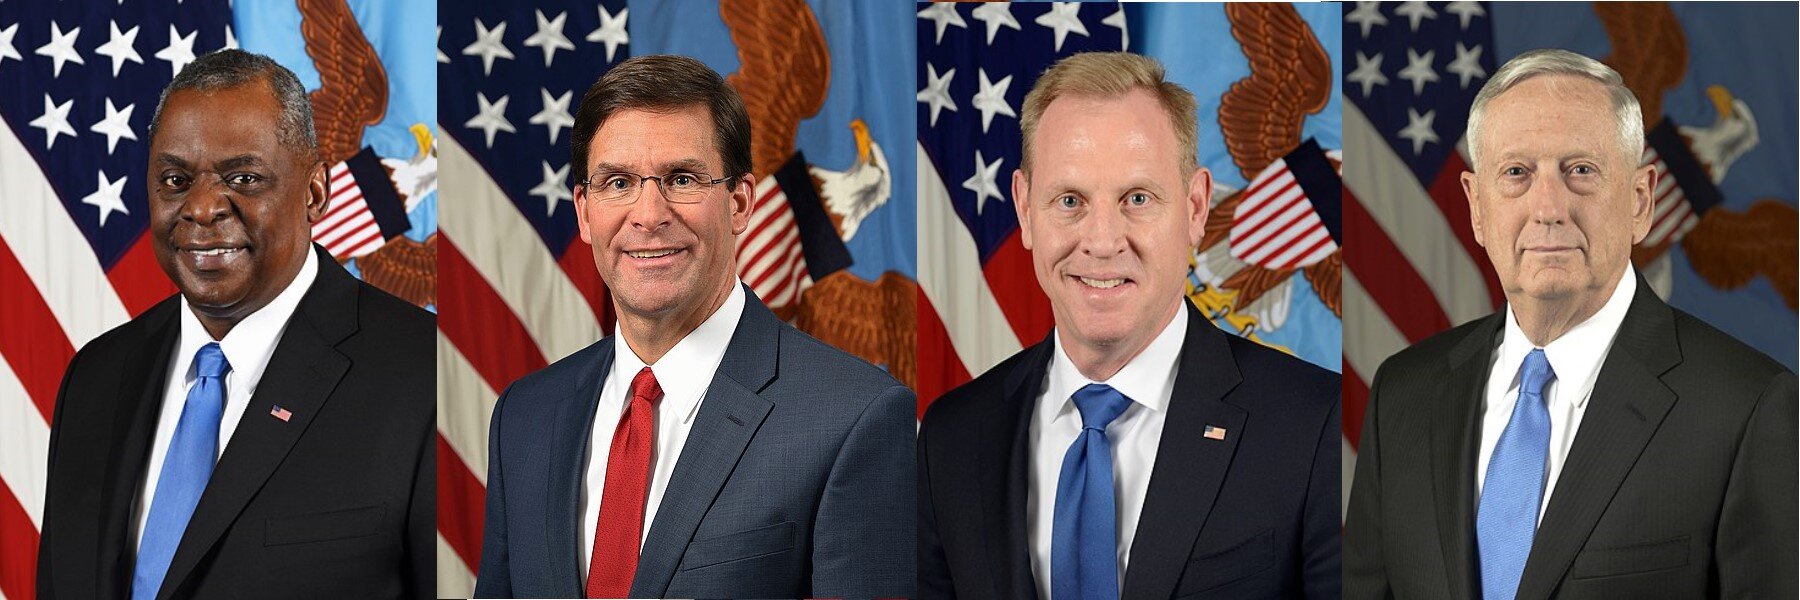 PICTURED: From left to right: Sec. of Defense Lloyd Austin. Former-Secretaries of Defense Mark Esper, Patrick Shanahan, and James Mattis. Excluding two previous Defense Secretaries who served only a few days, these four have all entered the job havi…